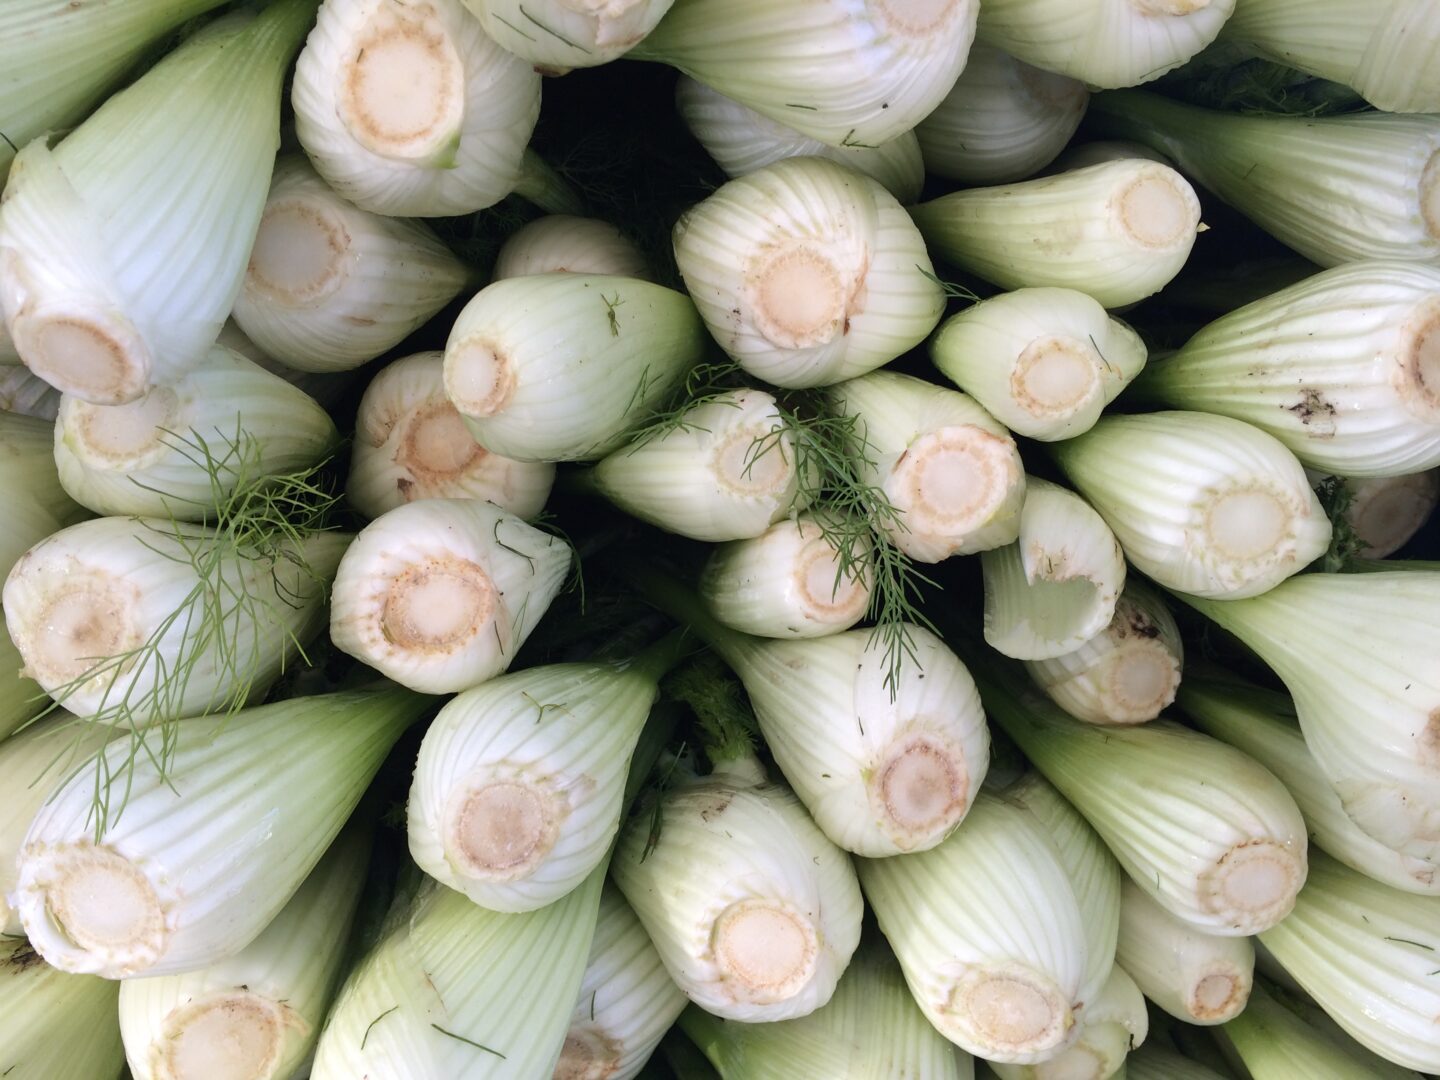 A close up of a bunch of white leeks.